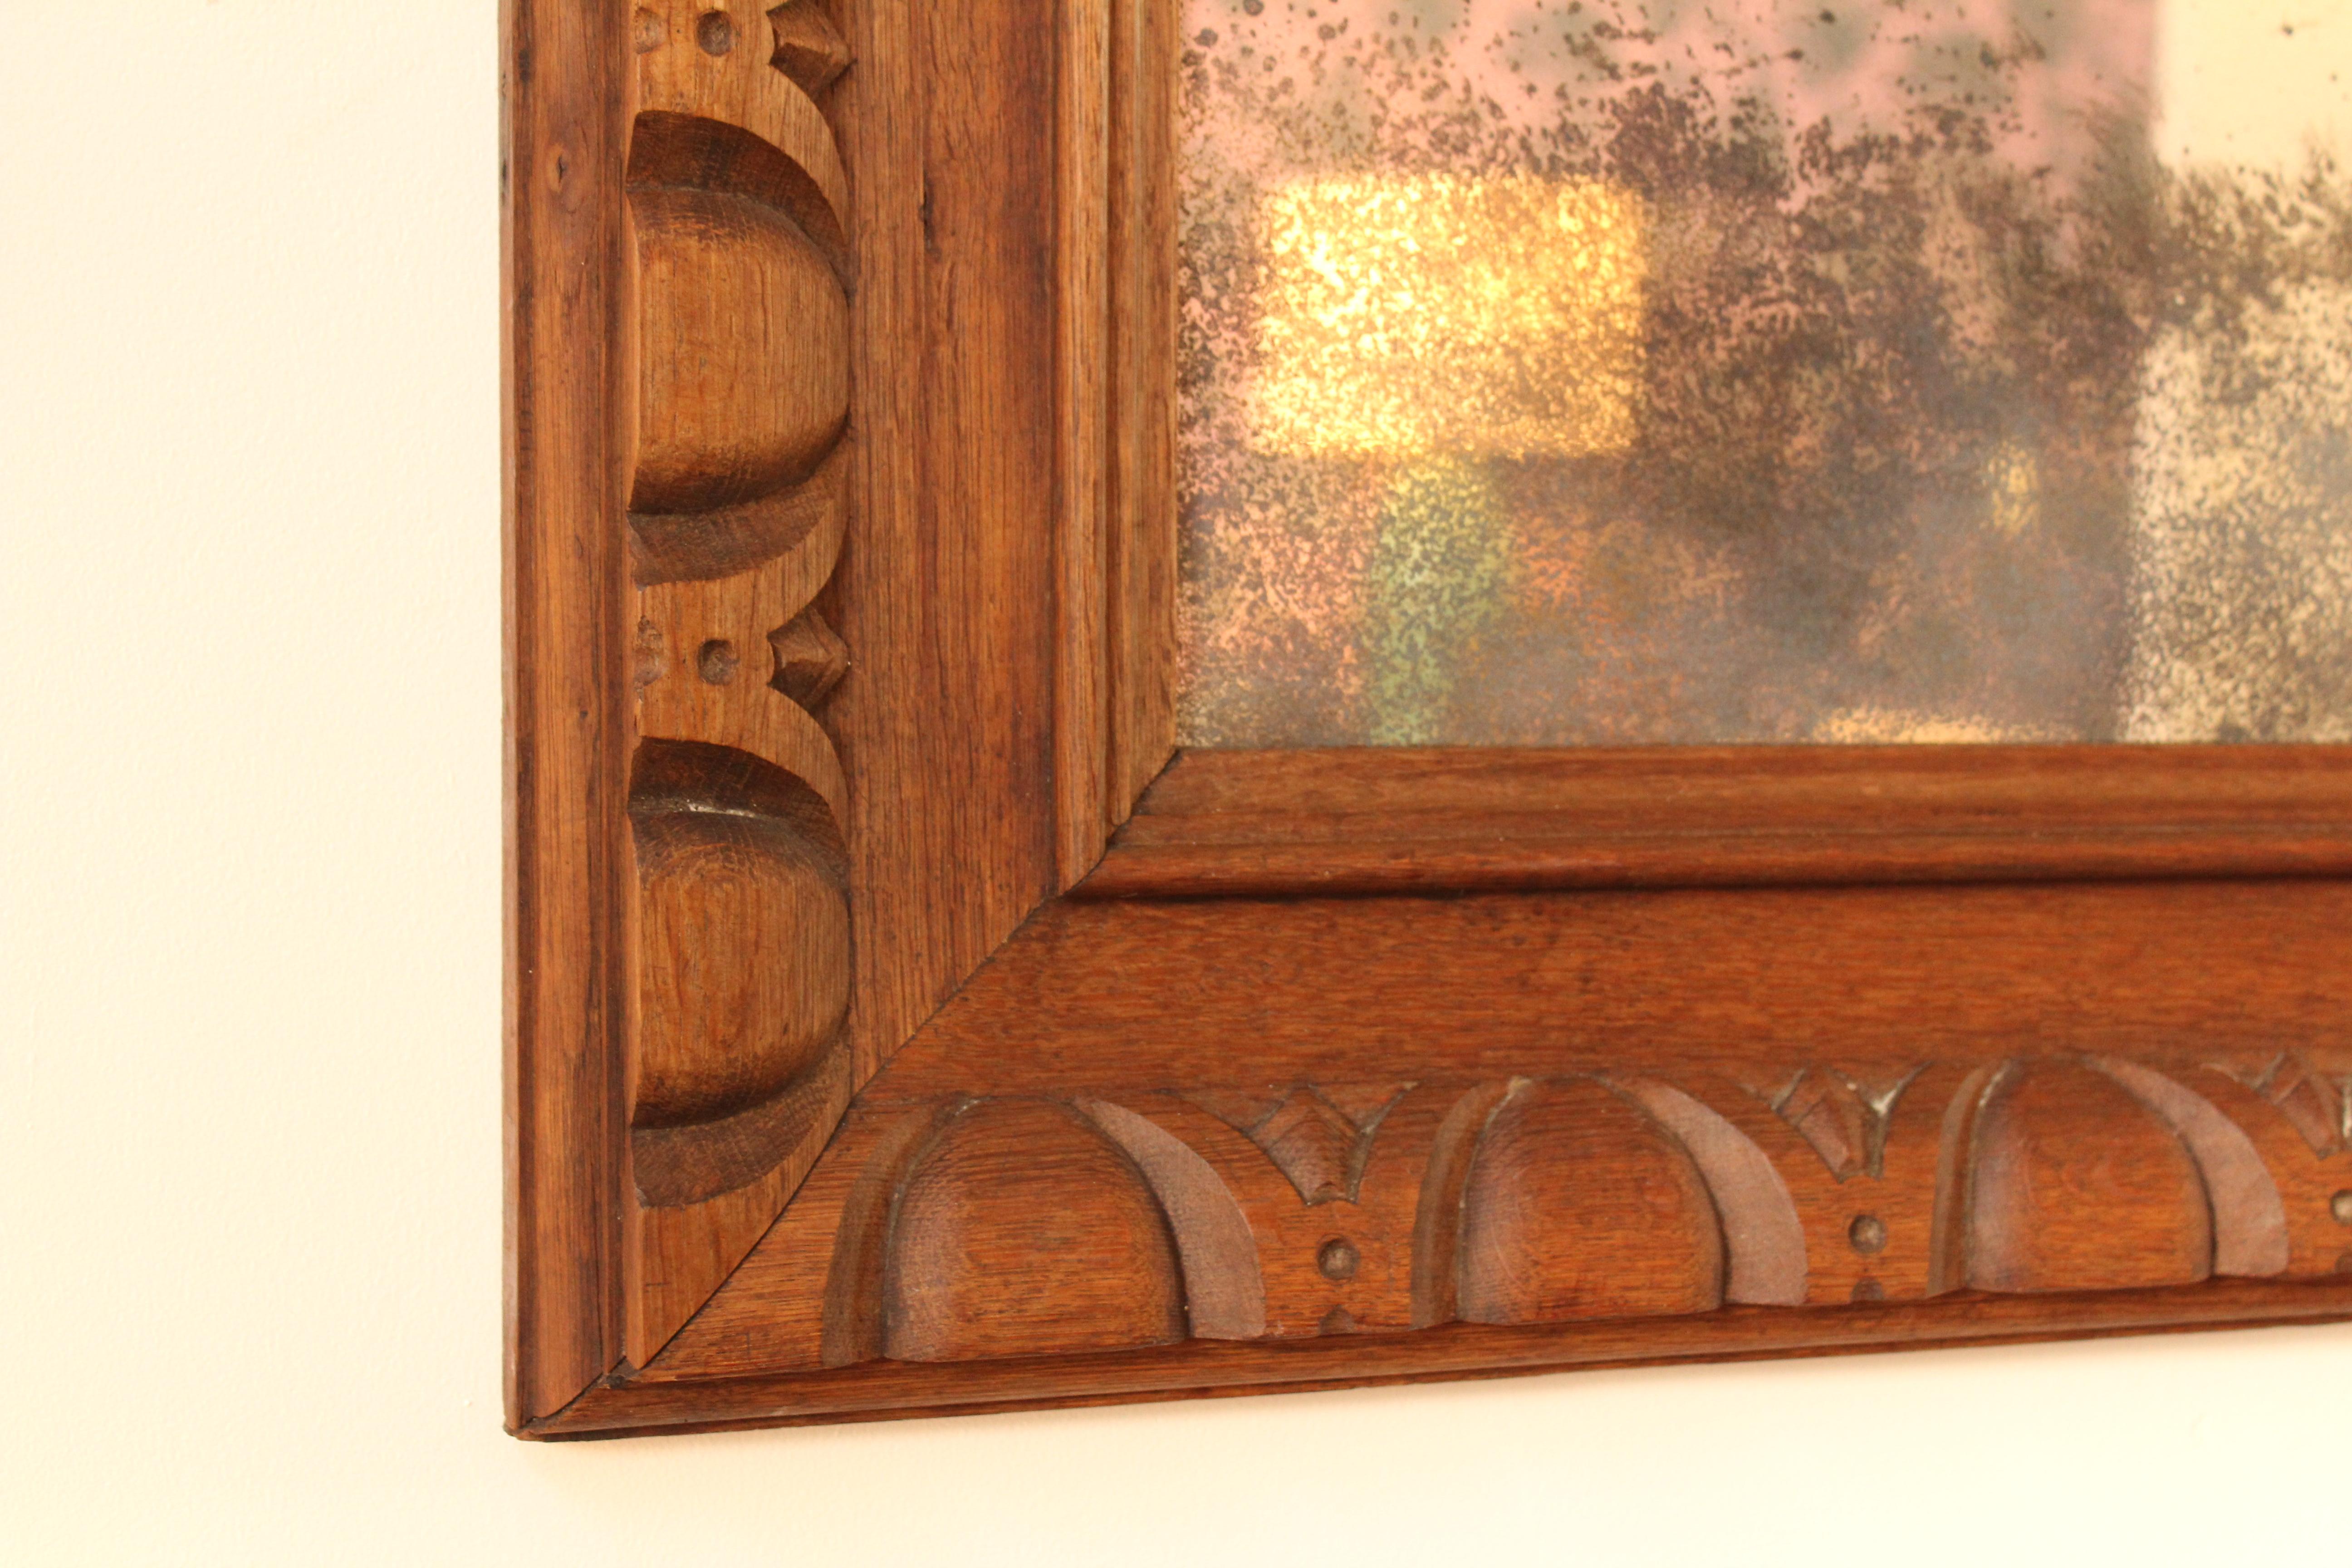 Large carved oak wall mirror, France, 1930s. The frame has been oiled and a mirror with an antique mercury finish has been professionally installed inside the frame.